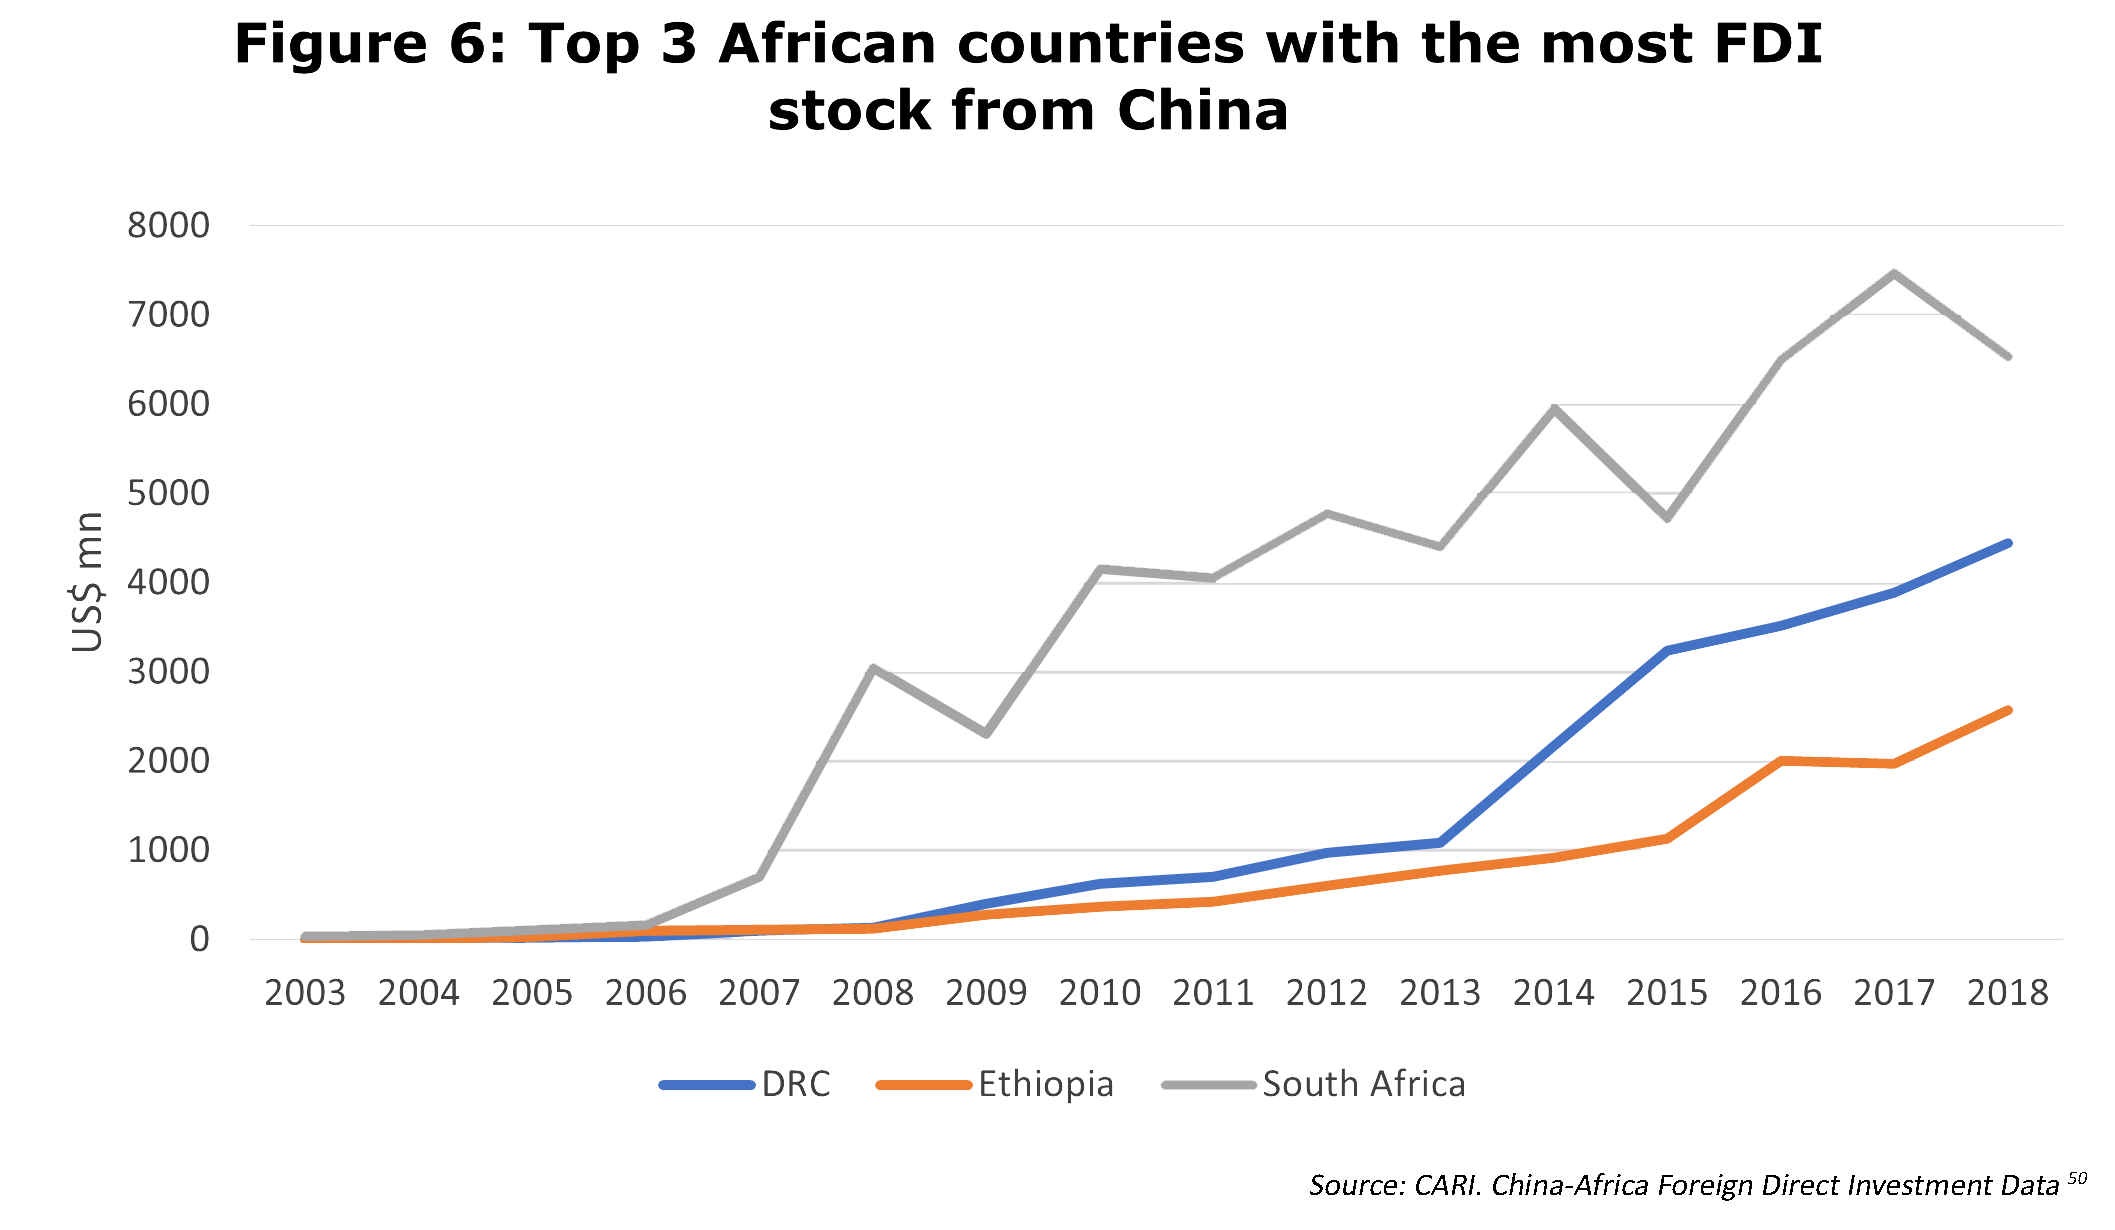 Top 3 African countries with the most FDI stock from China